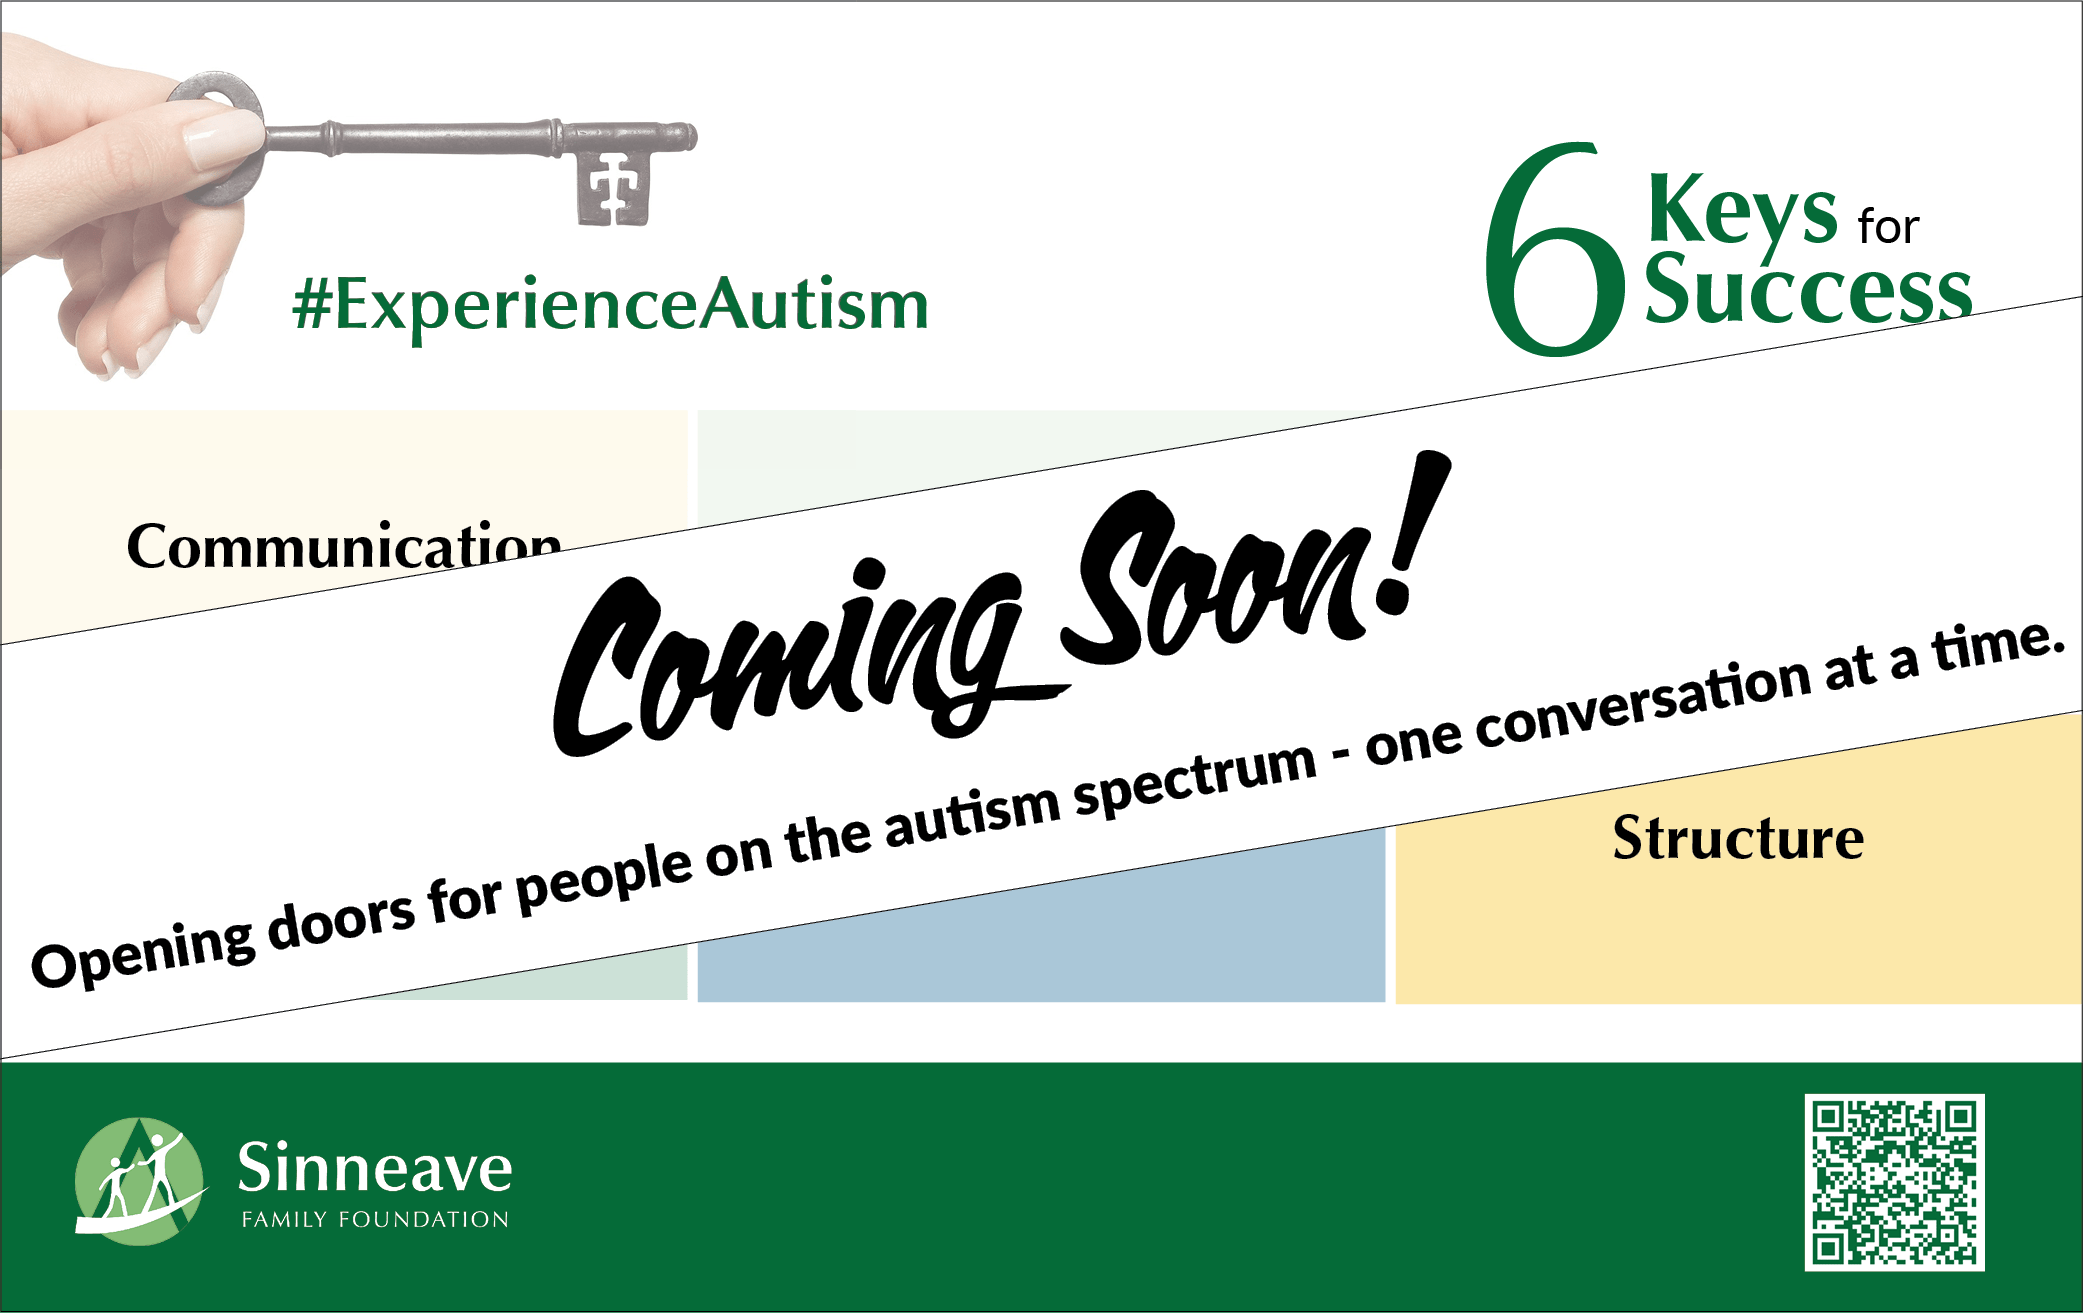 Experience Autism, coming soon